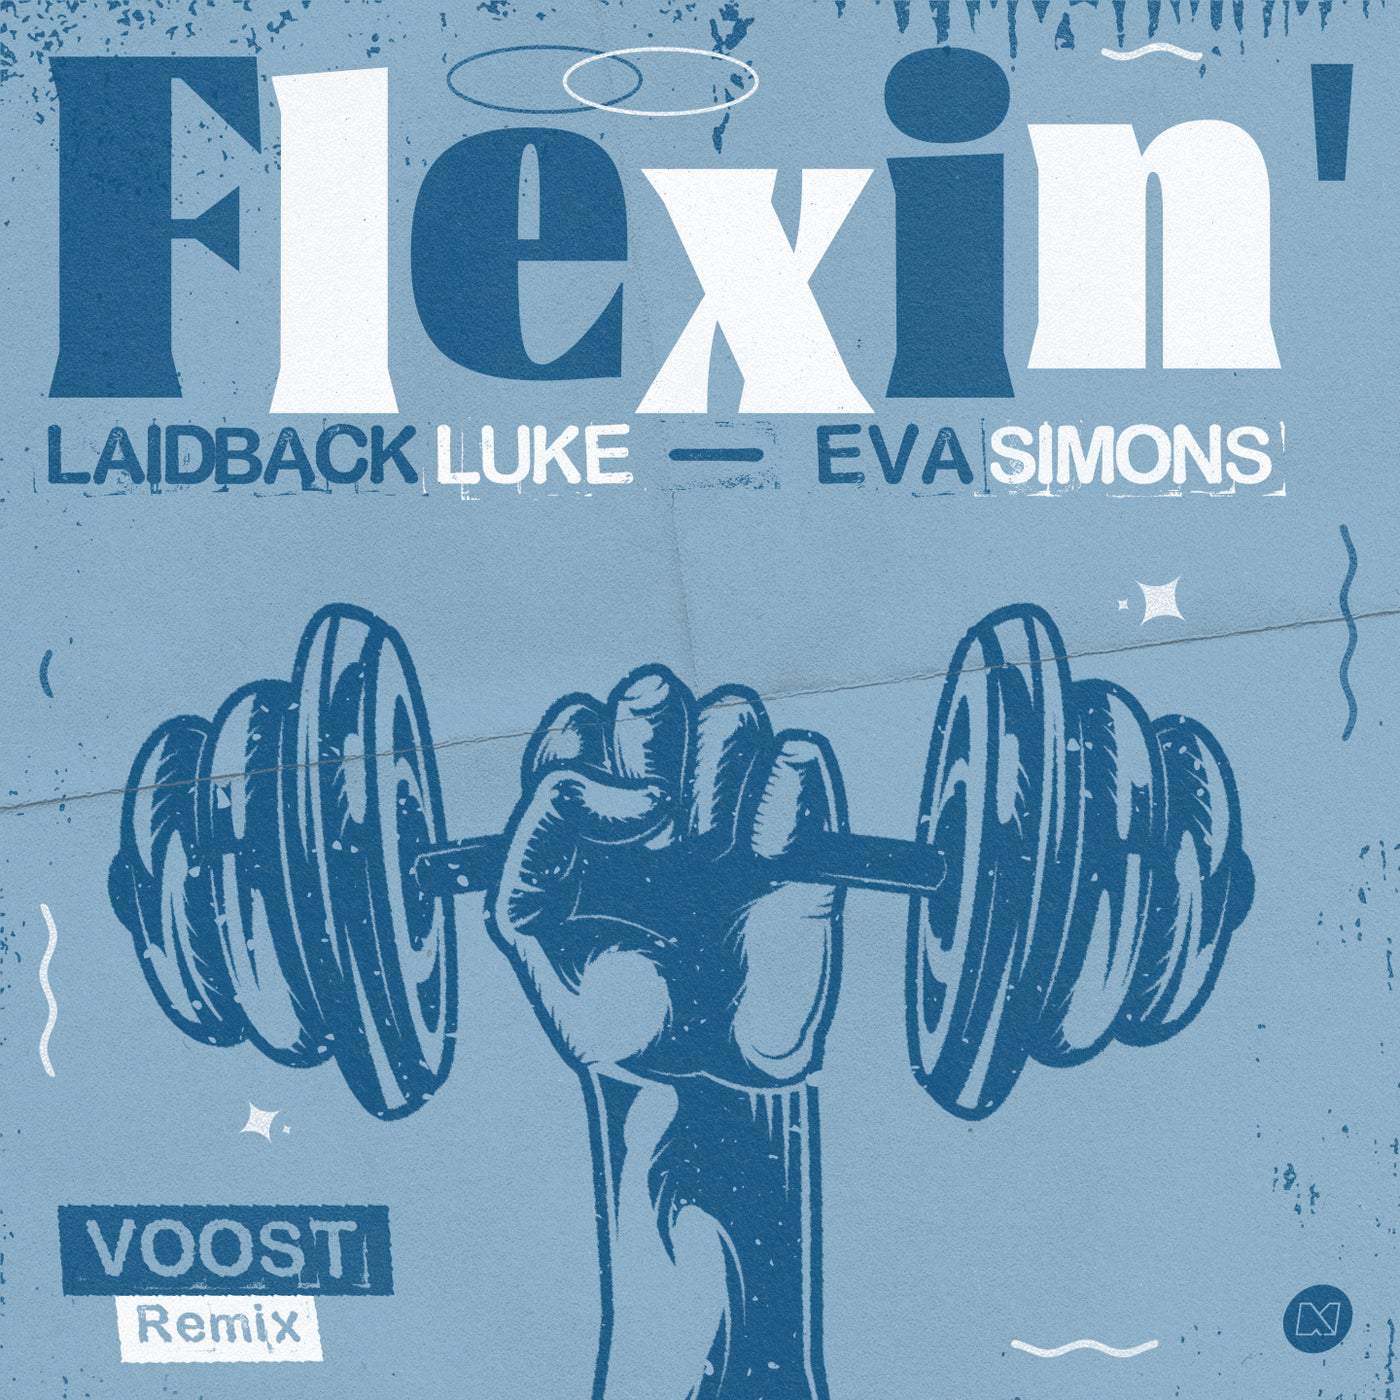 image cover: Laidback Luke, Eva Simons, Voost - Flexin' (Voost Remix Extended Mix) / MIXMA379B